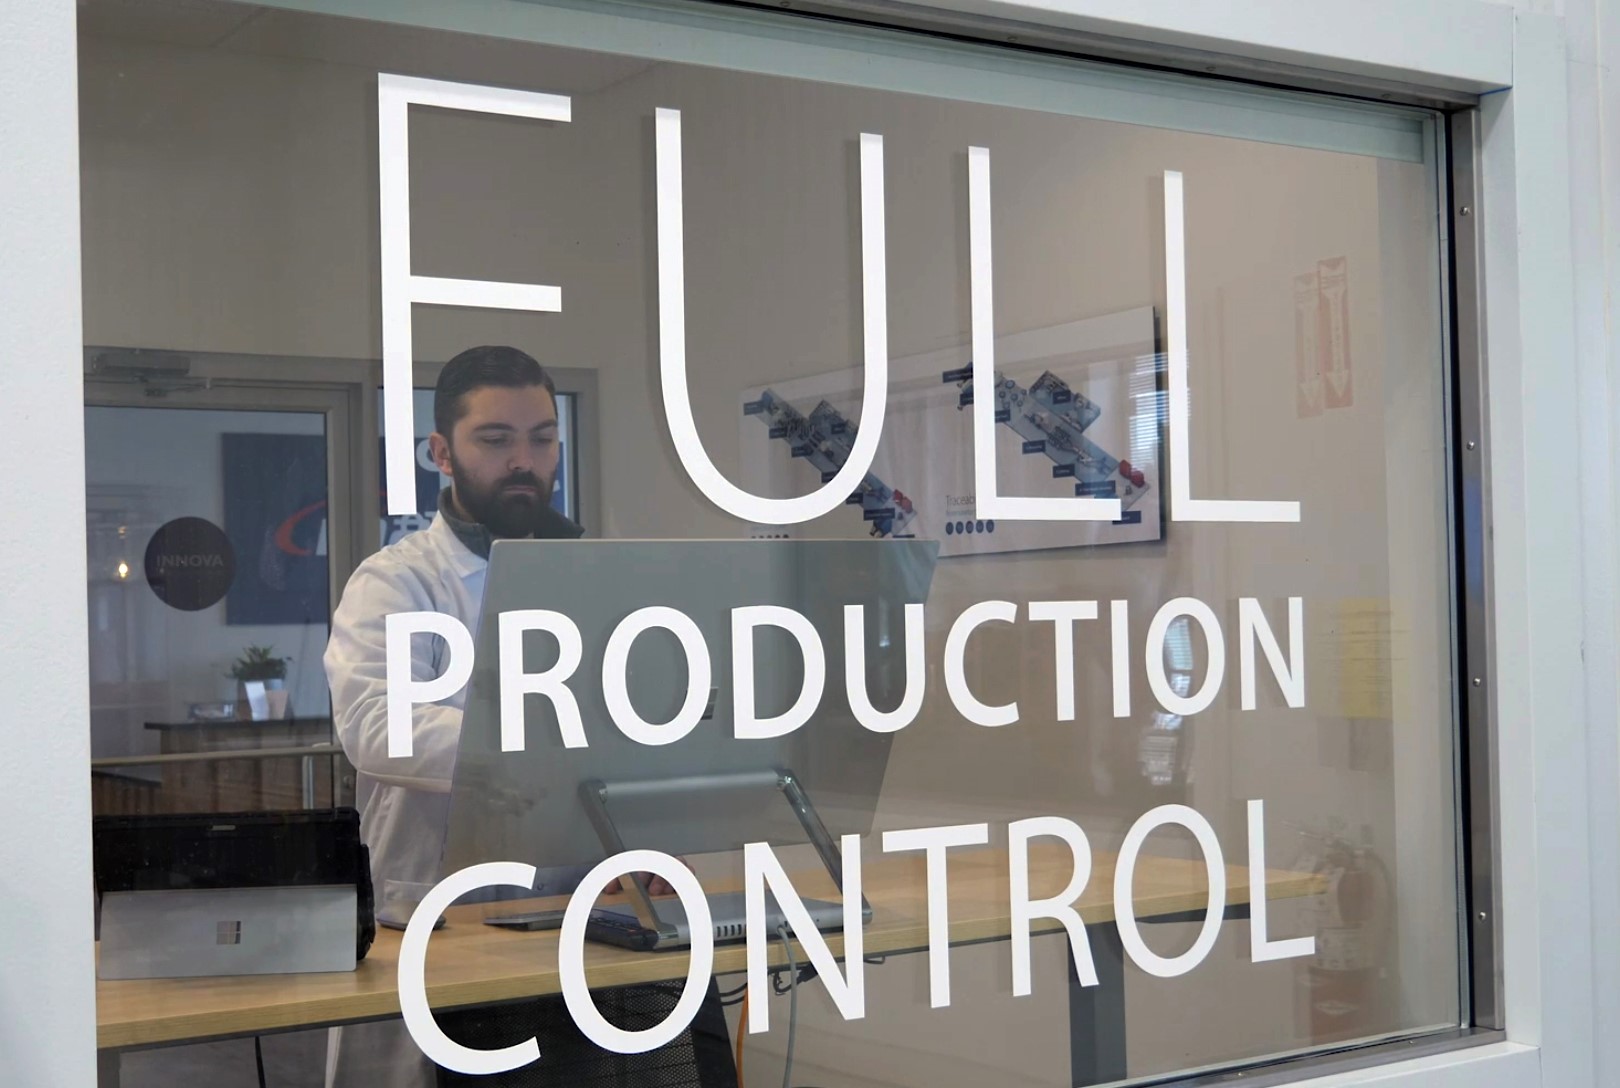 Full Production Control